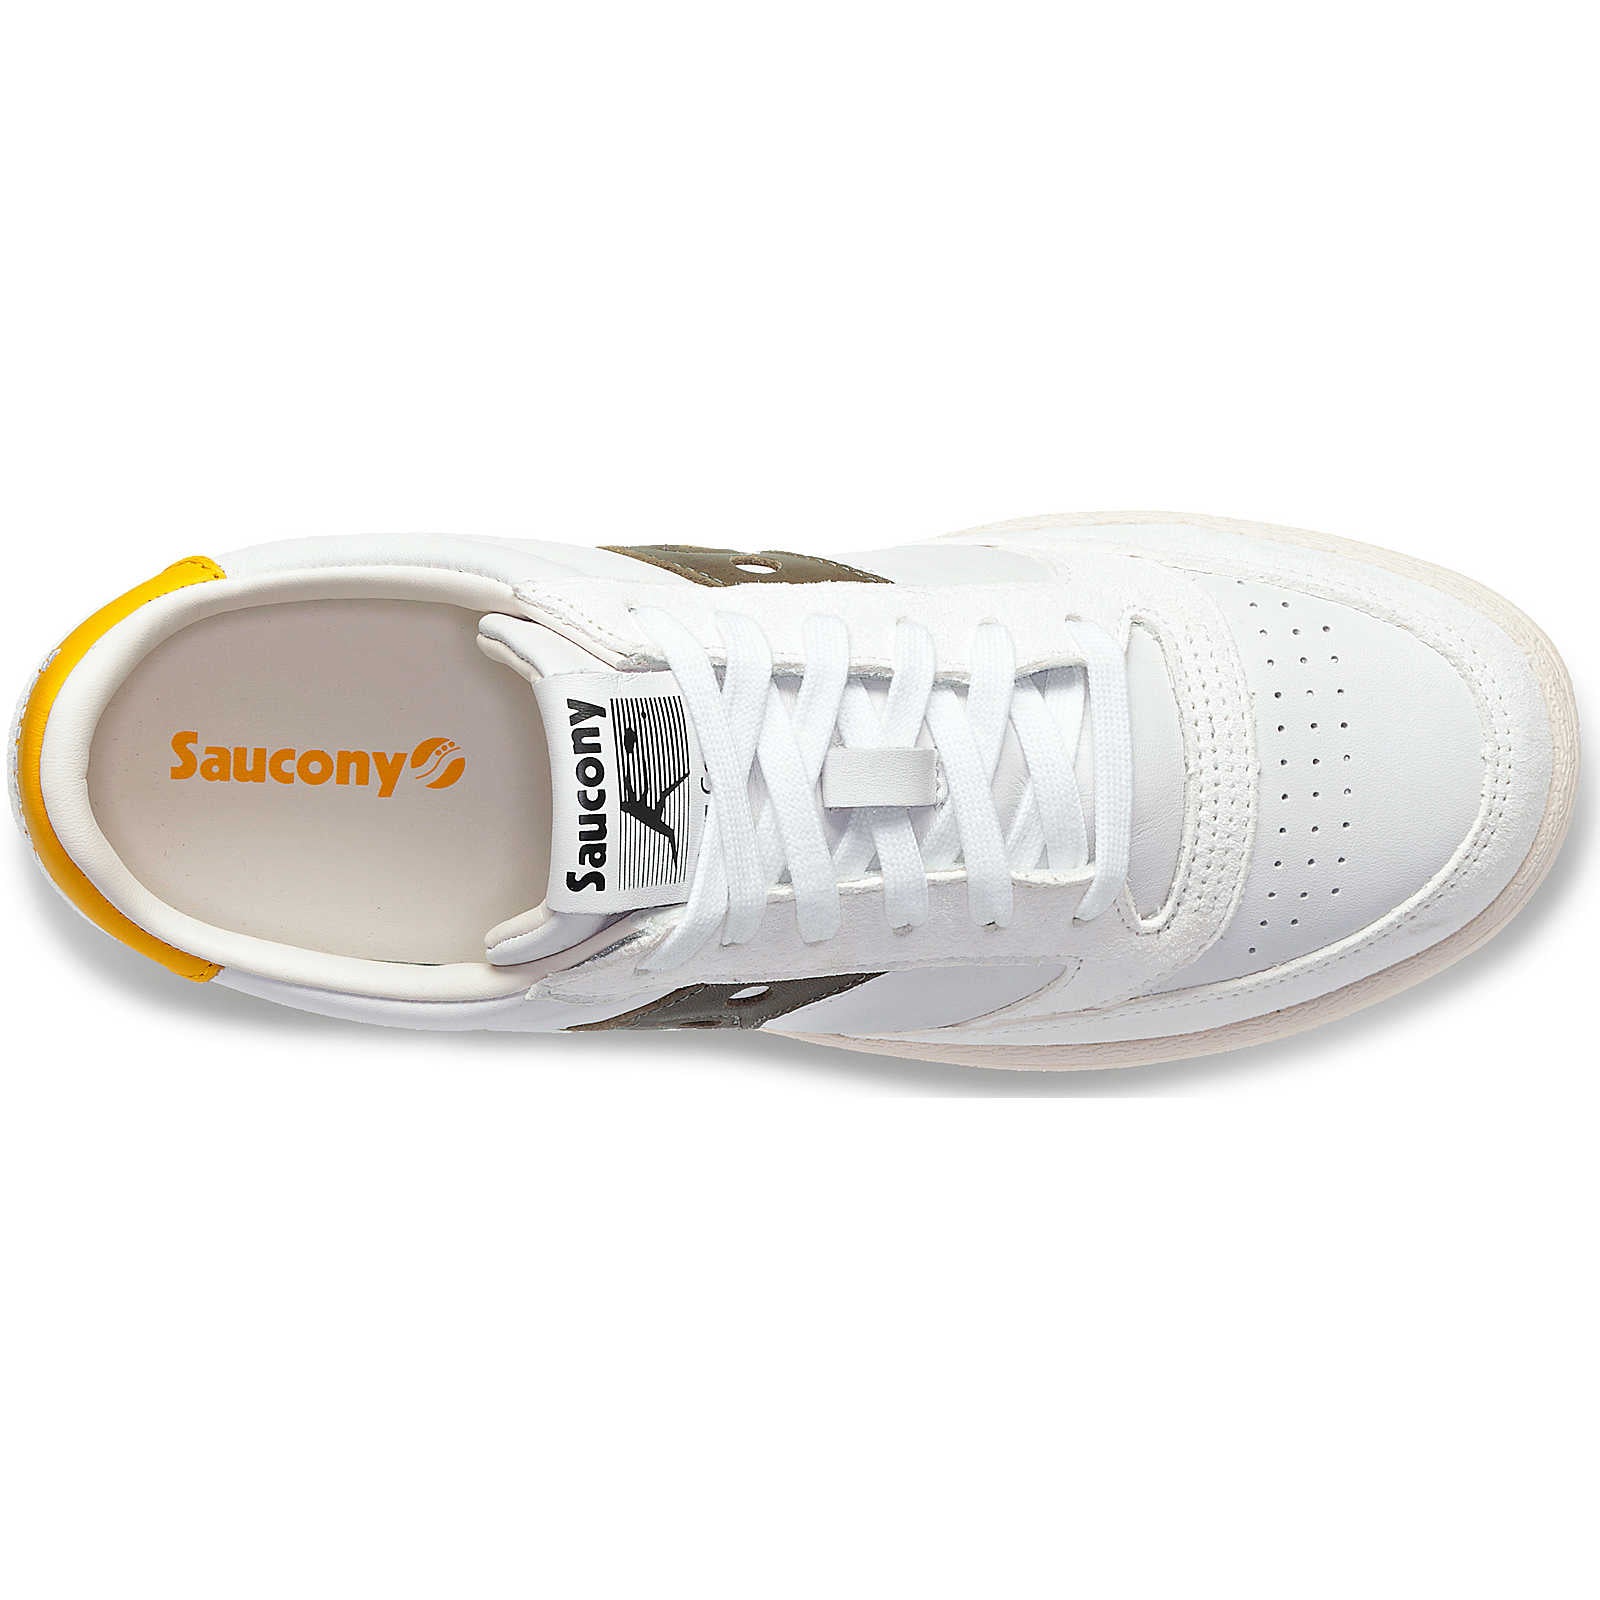 Saucony Mens Jazz Court Trainers - White / Green